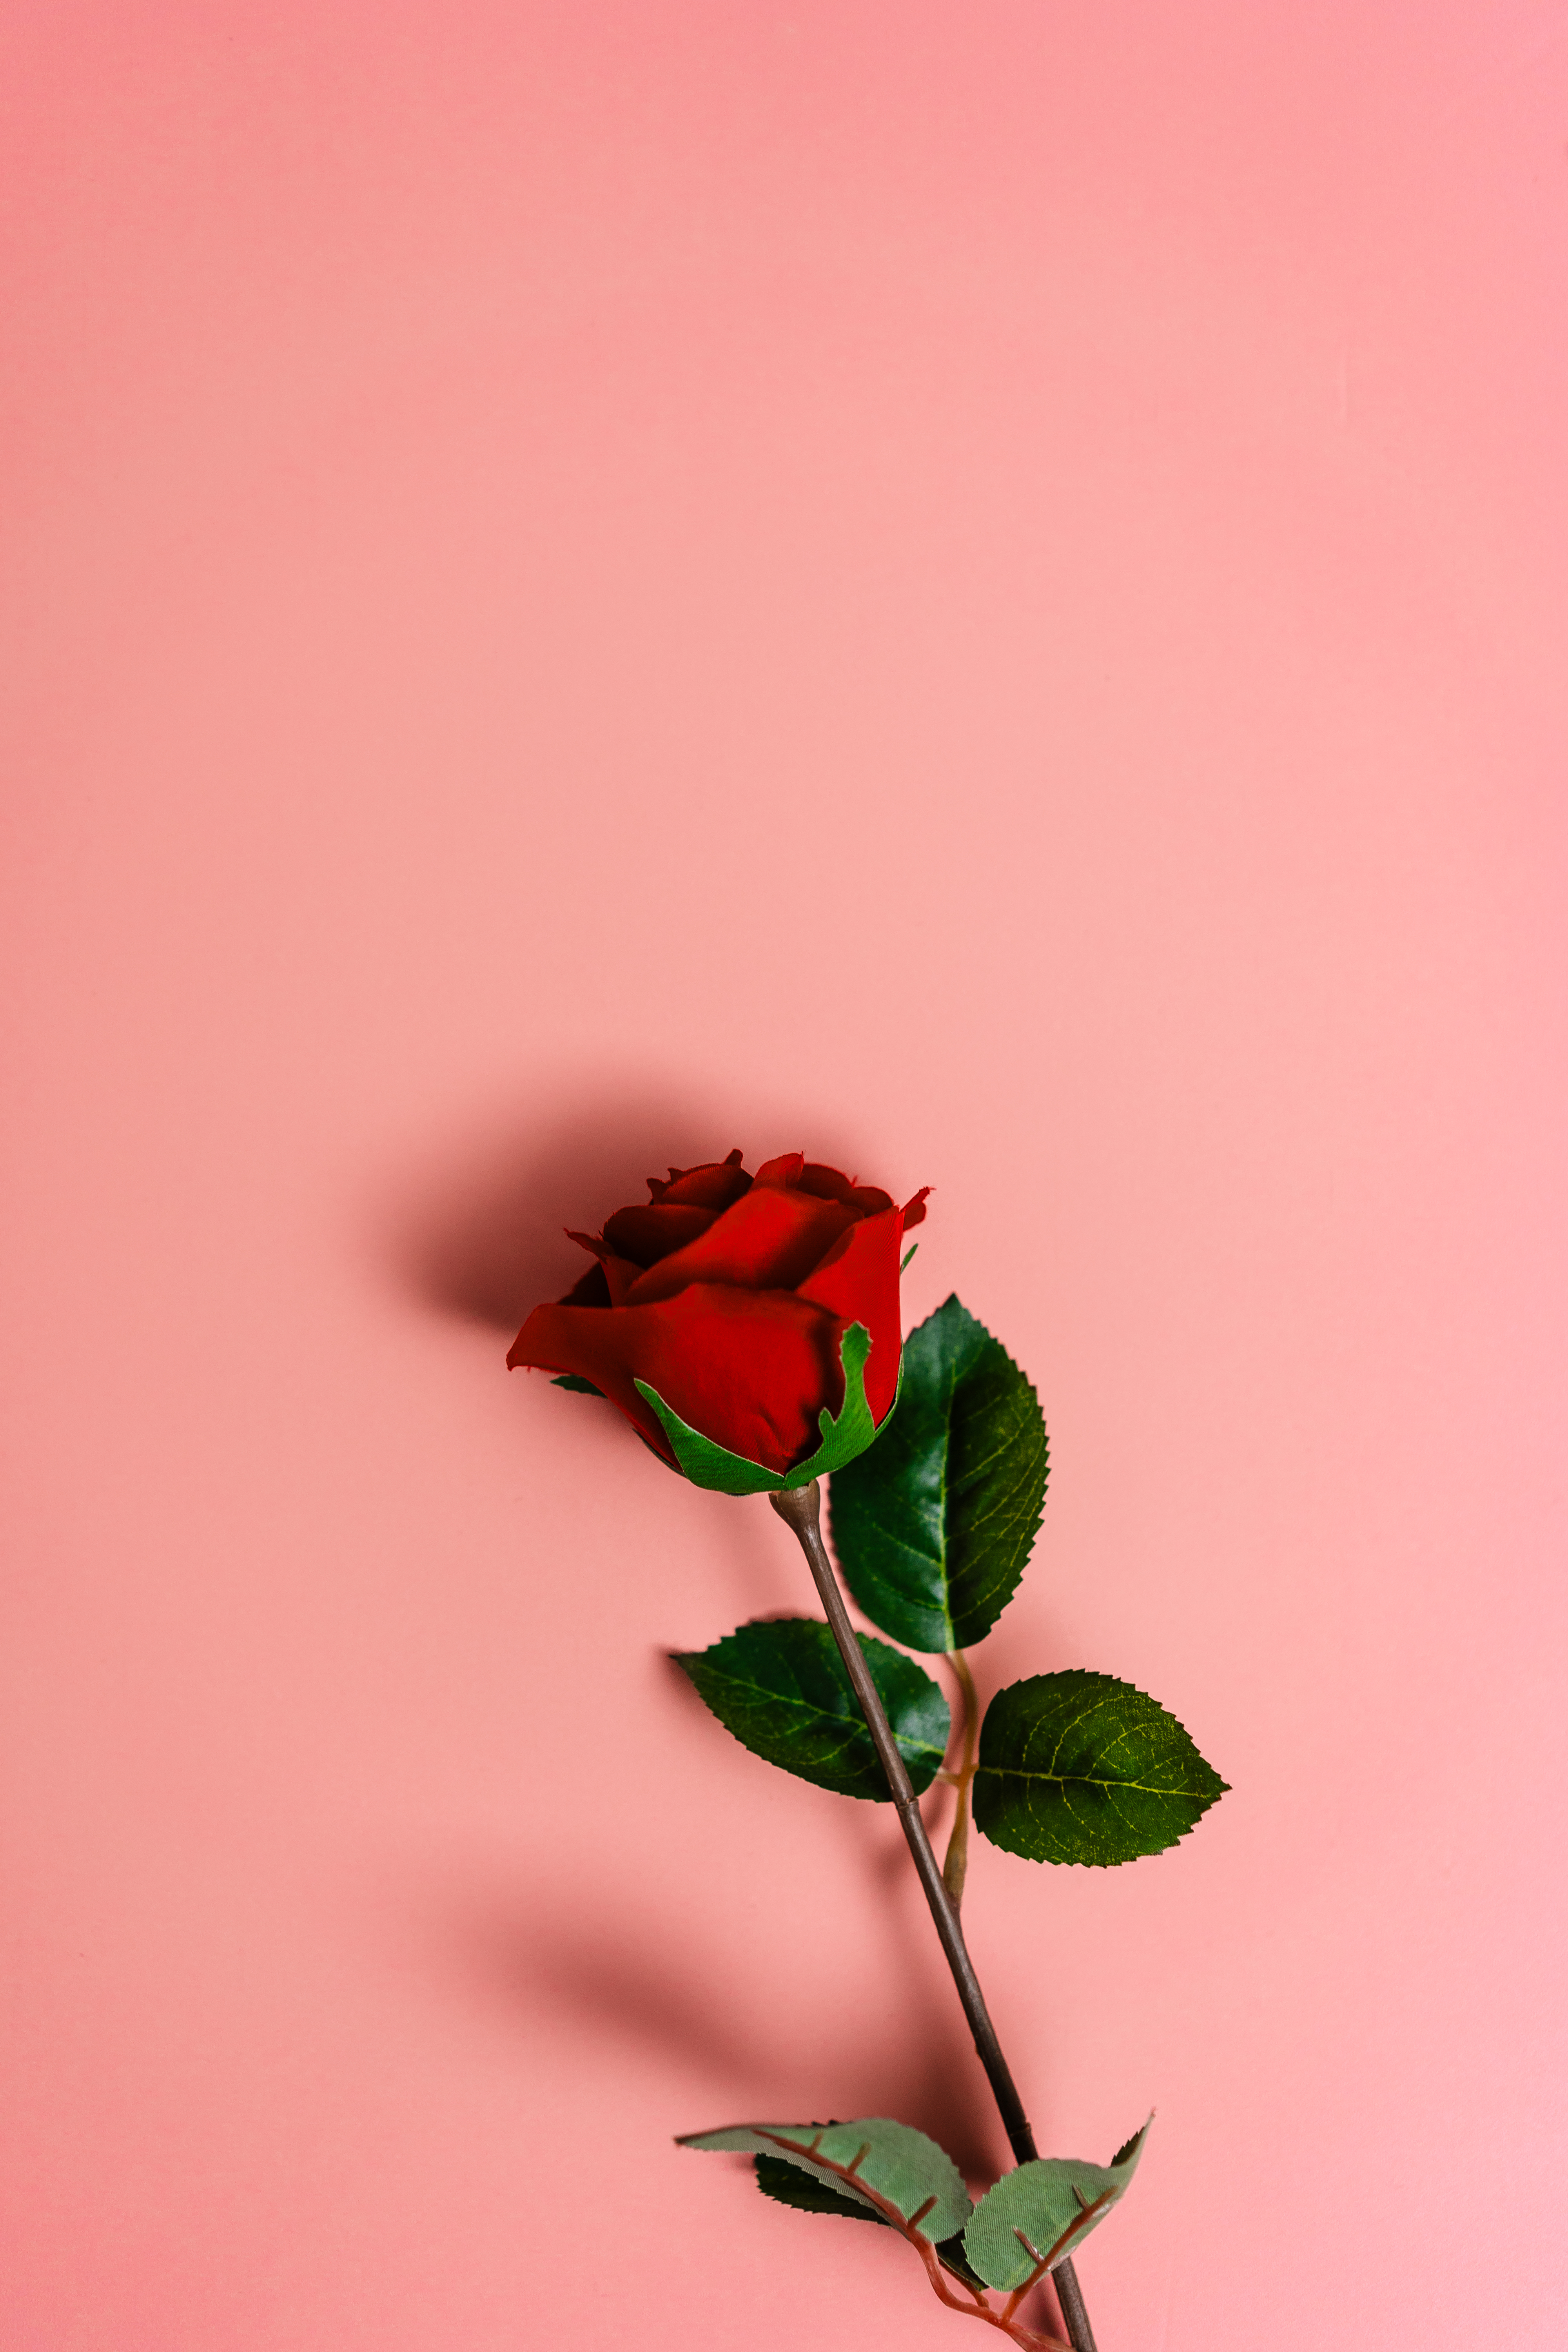 Beautiful Red Rose on Pastel Background Free Stock Photo